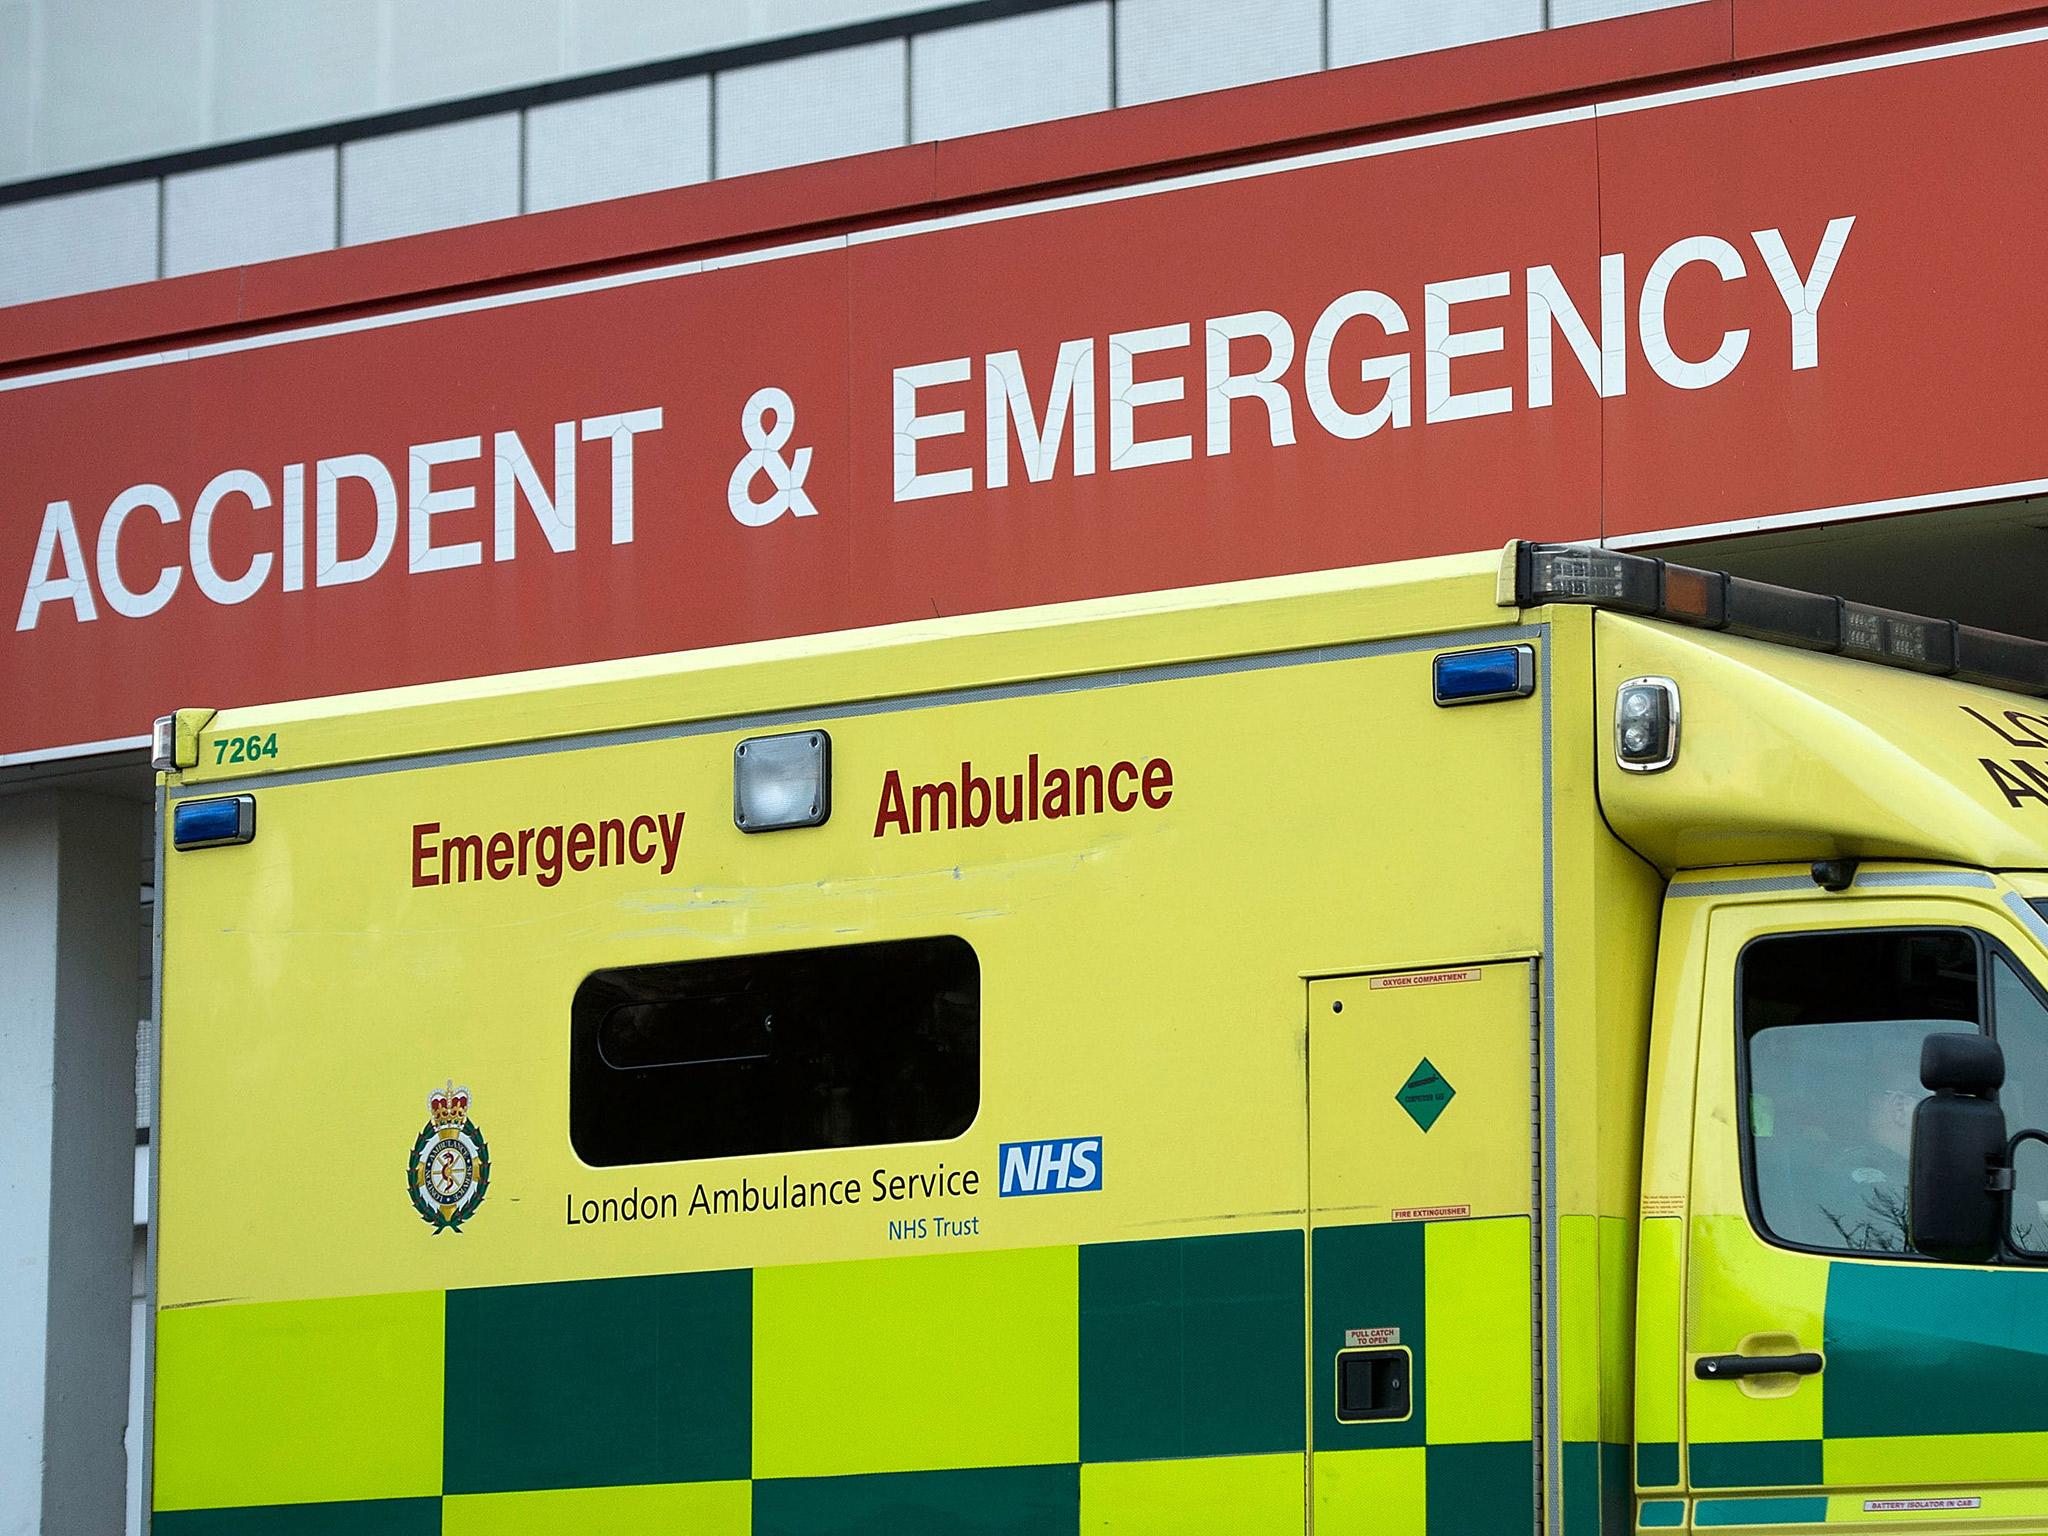 Ambulance staff have urged people to consider if they really need to ring 999, or if they should ring 101 instead